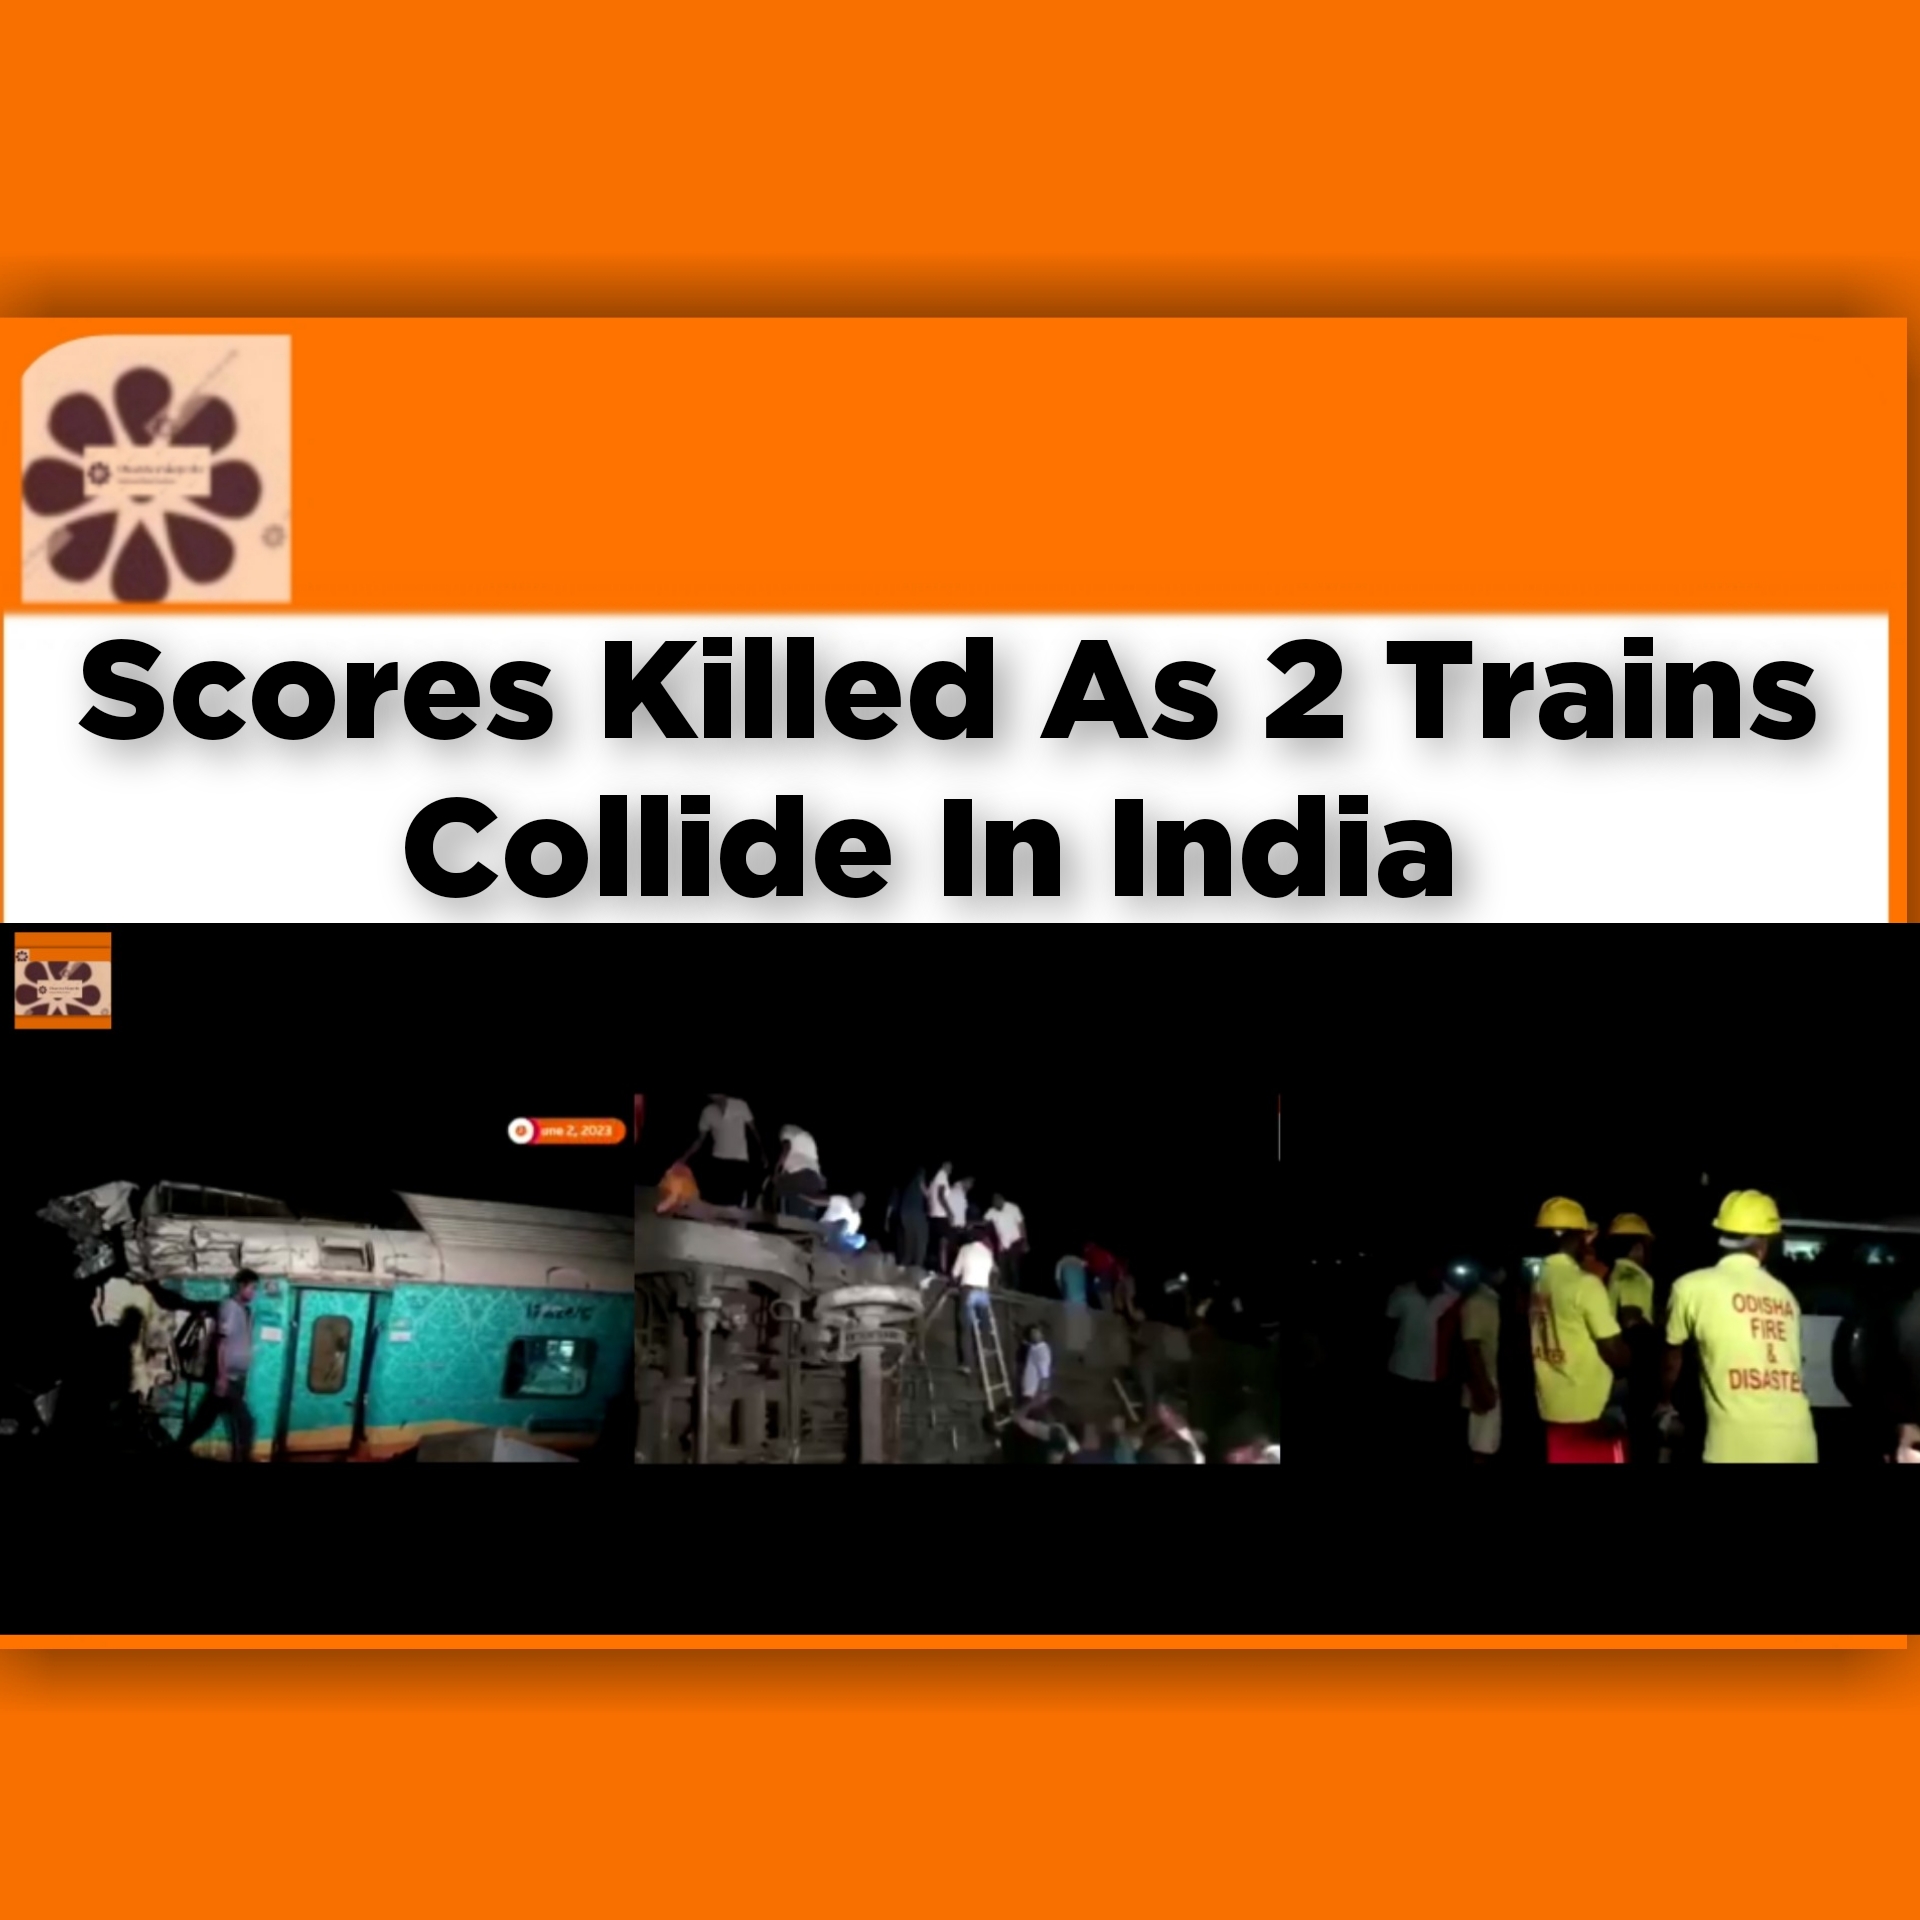 Scores Killed As 2 Trains Collide In India ~ OsazuwaAkonedo #Peter